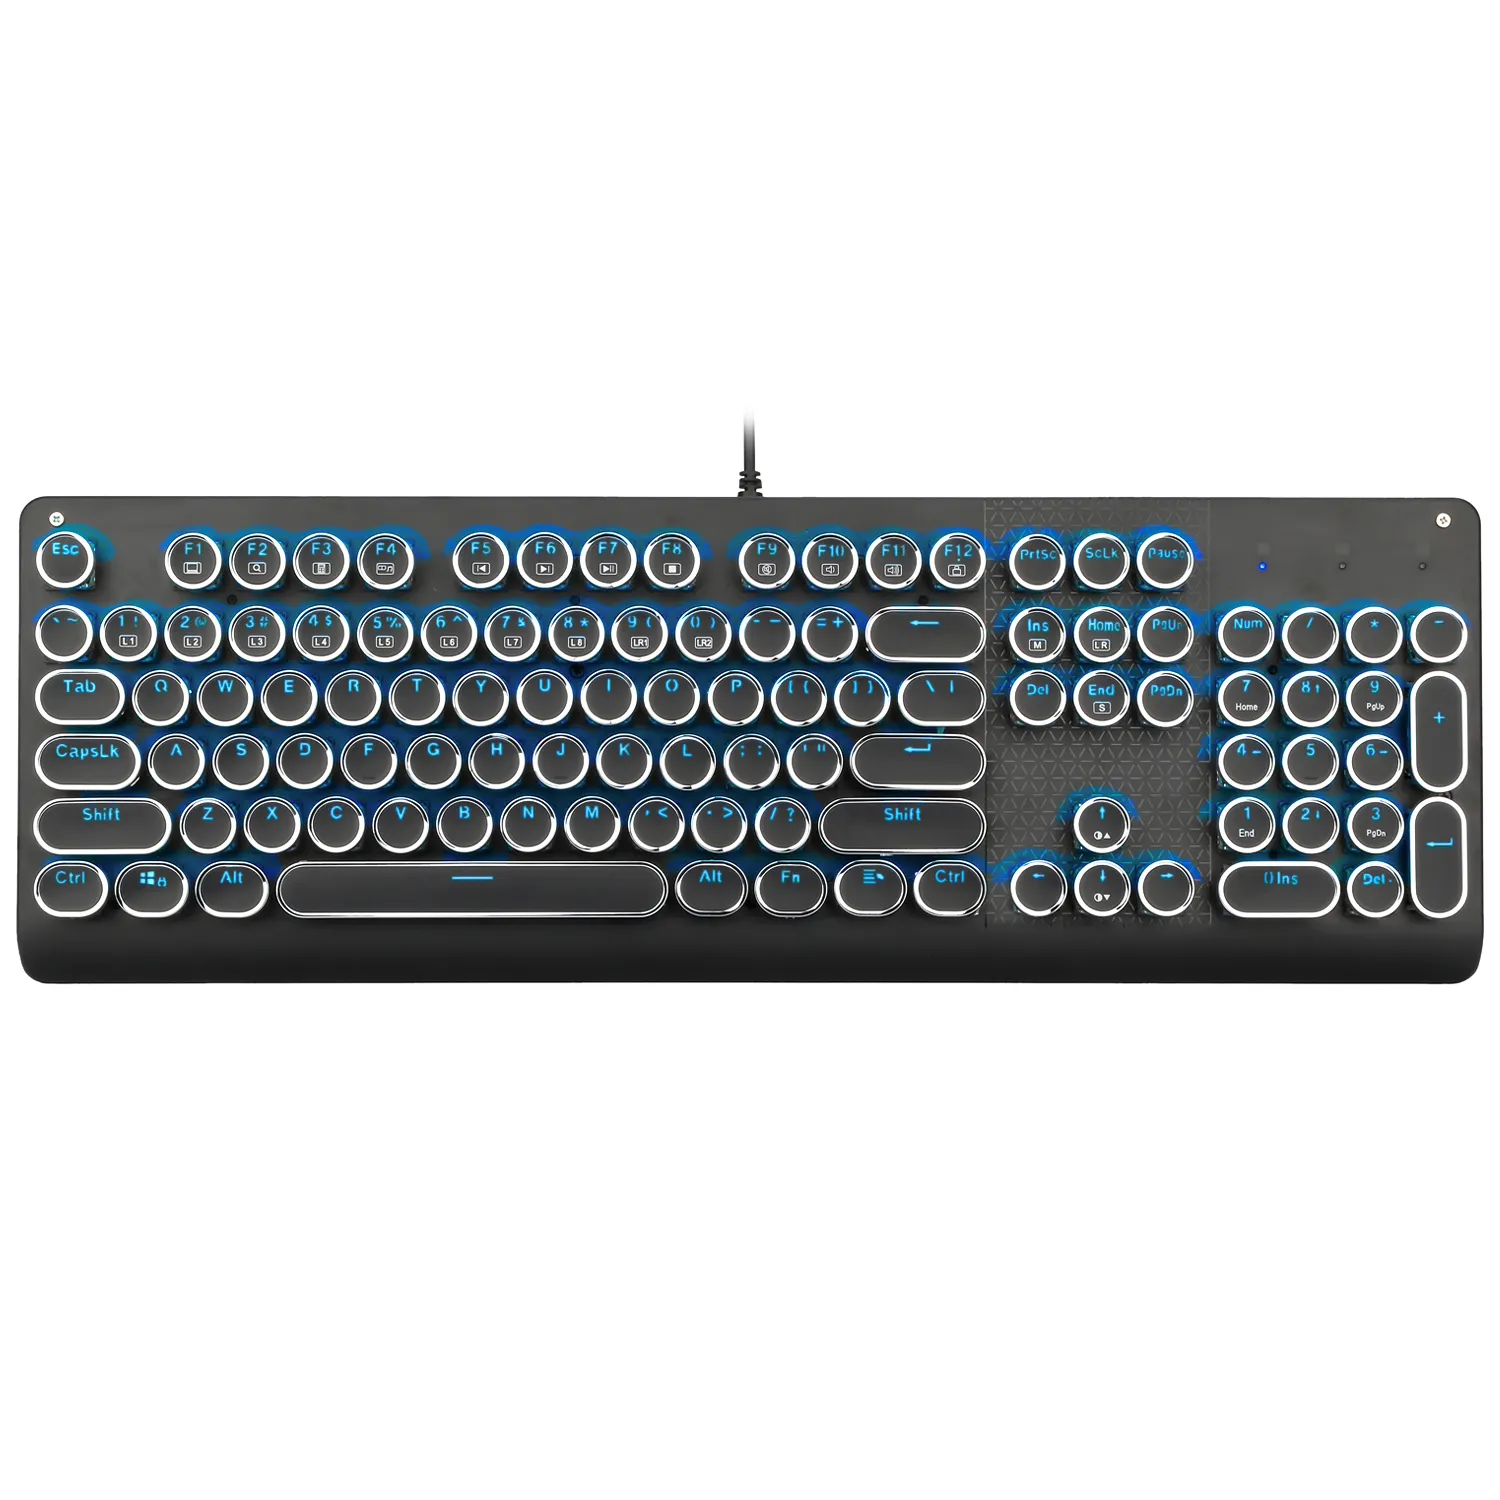 White Wired Keyboard Blue Axis Mechanical Keyboard With Light Gaming Mechanical Keyboard